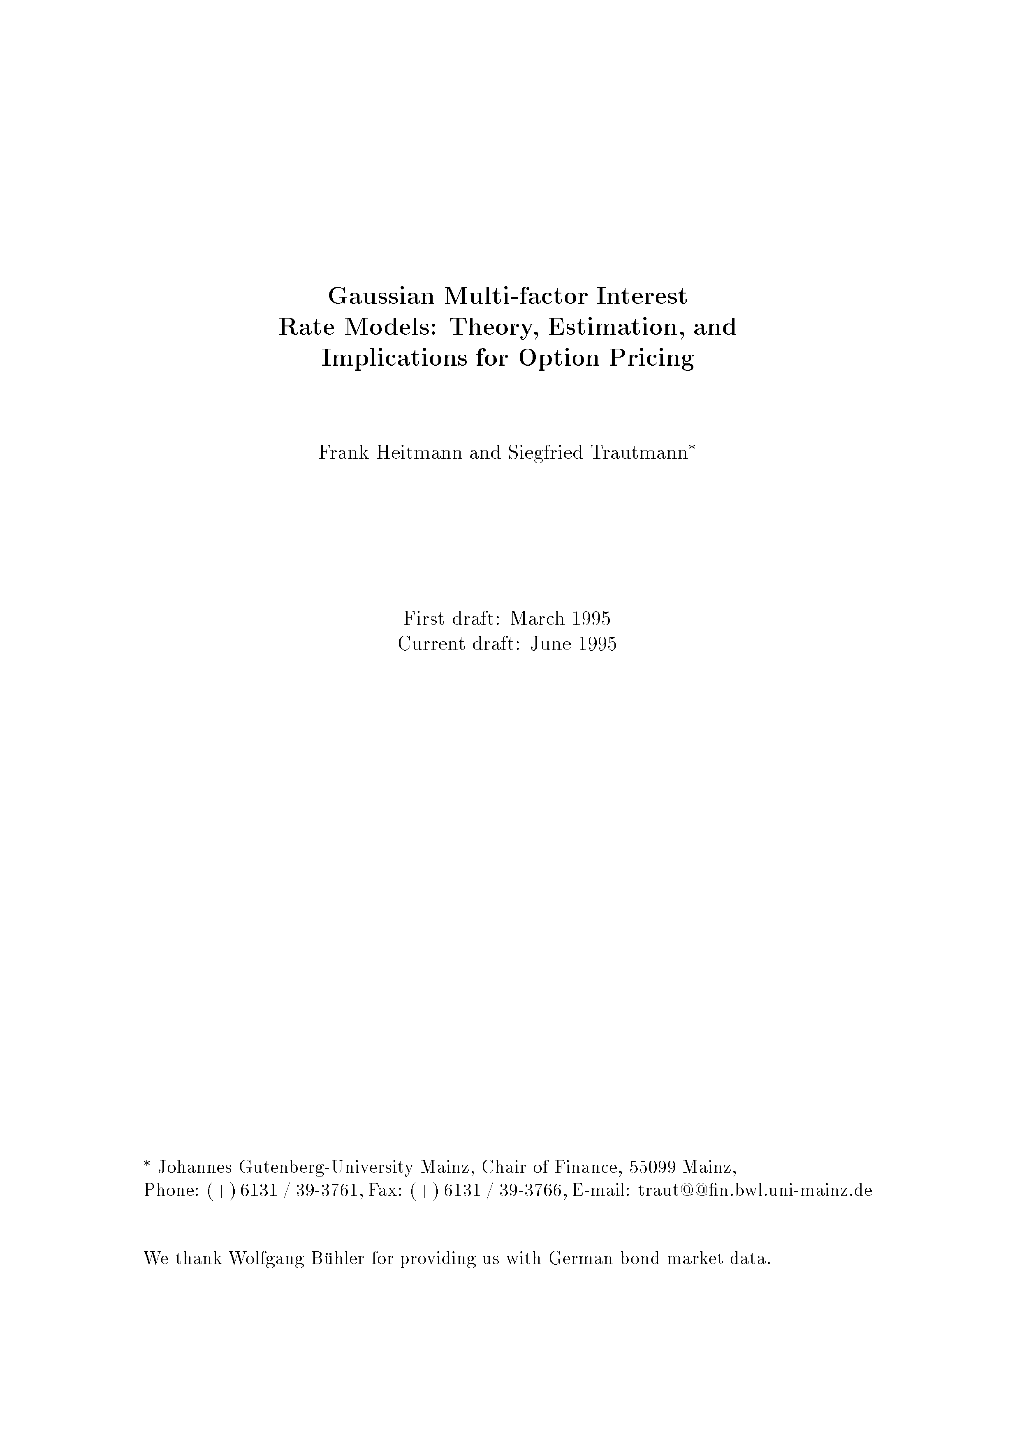 Gaussian Multi-Factor Interest Rate Models: Theory, Estimation, And